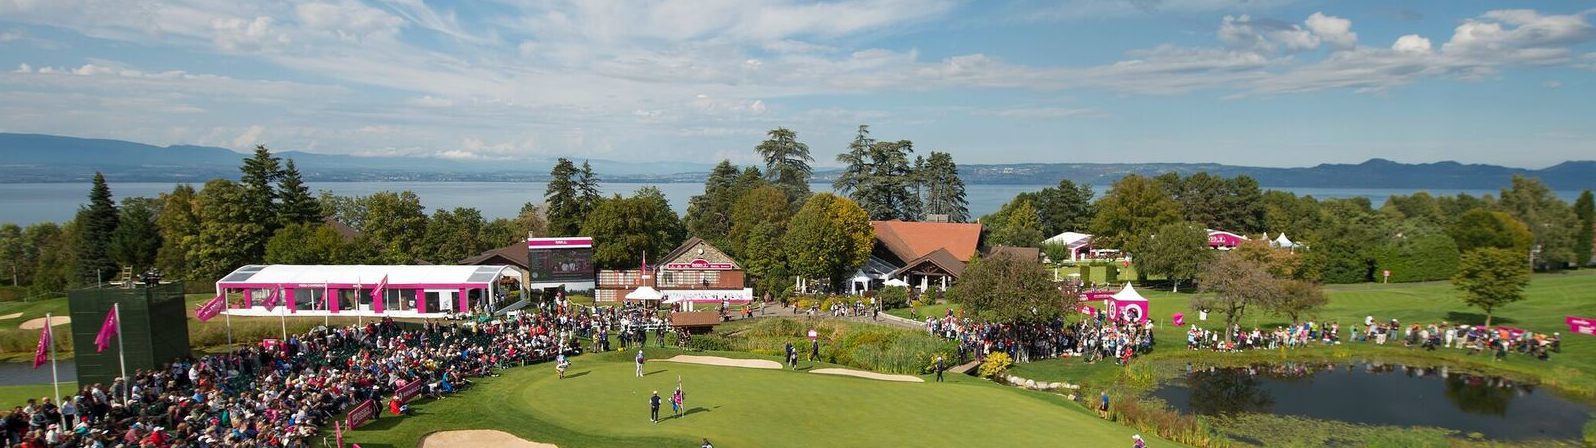 Rolex general view of 18th Green Evian